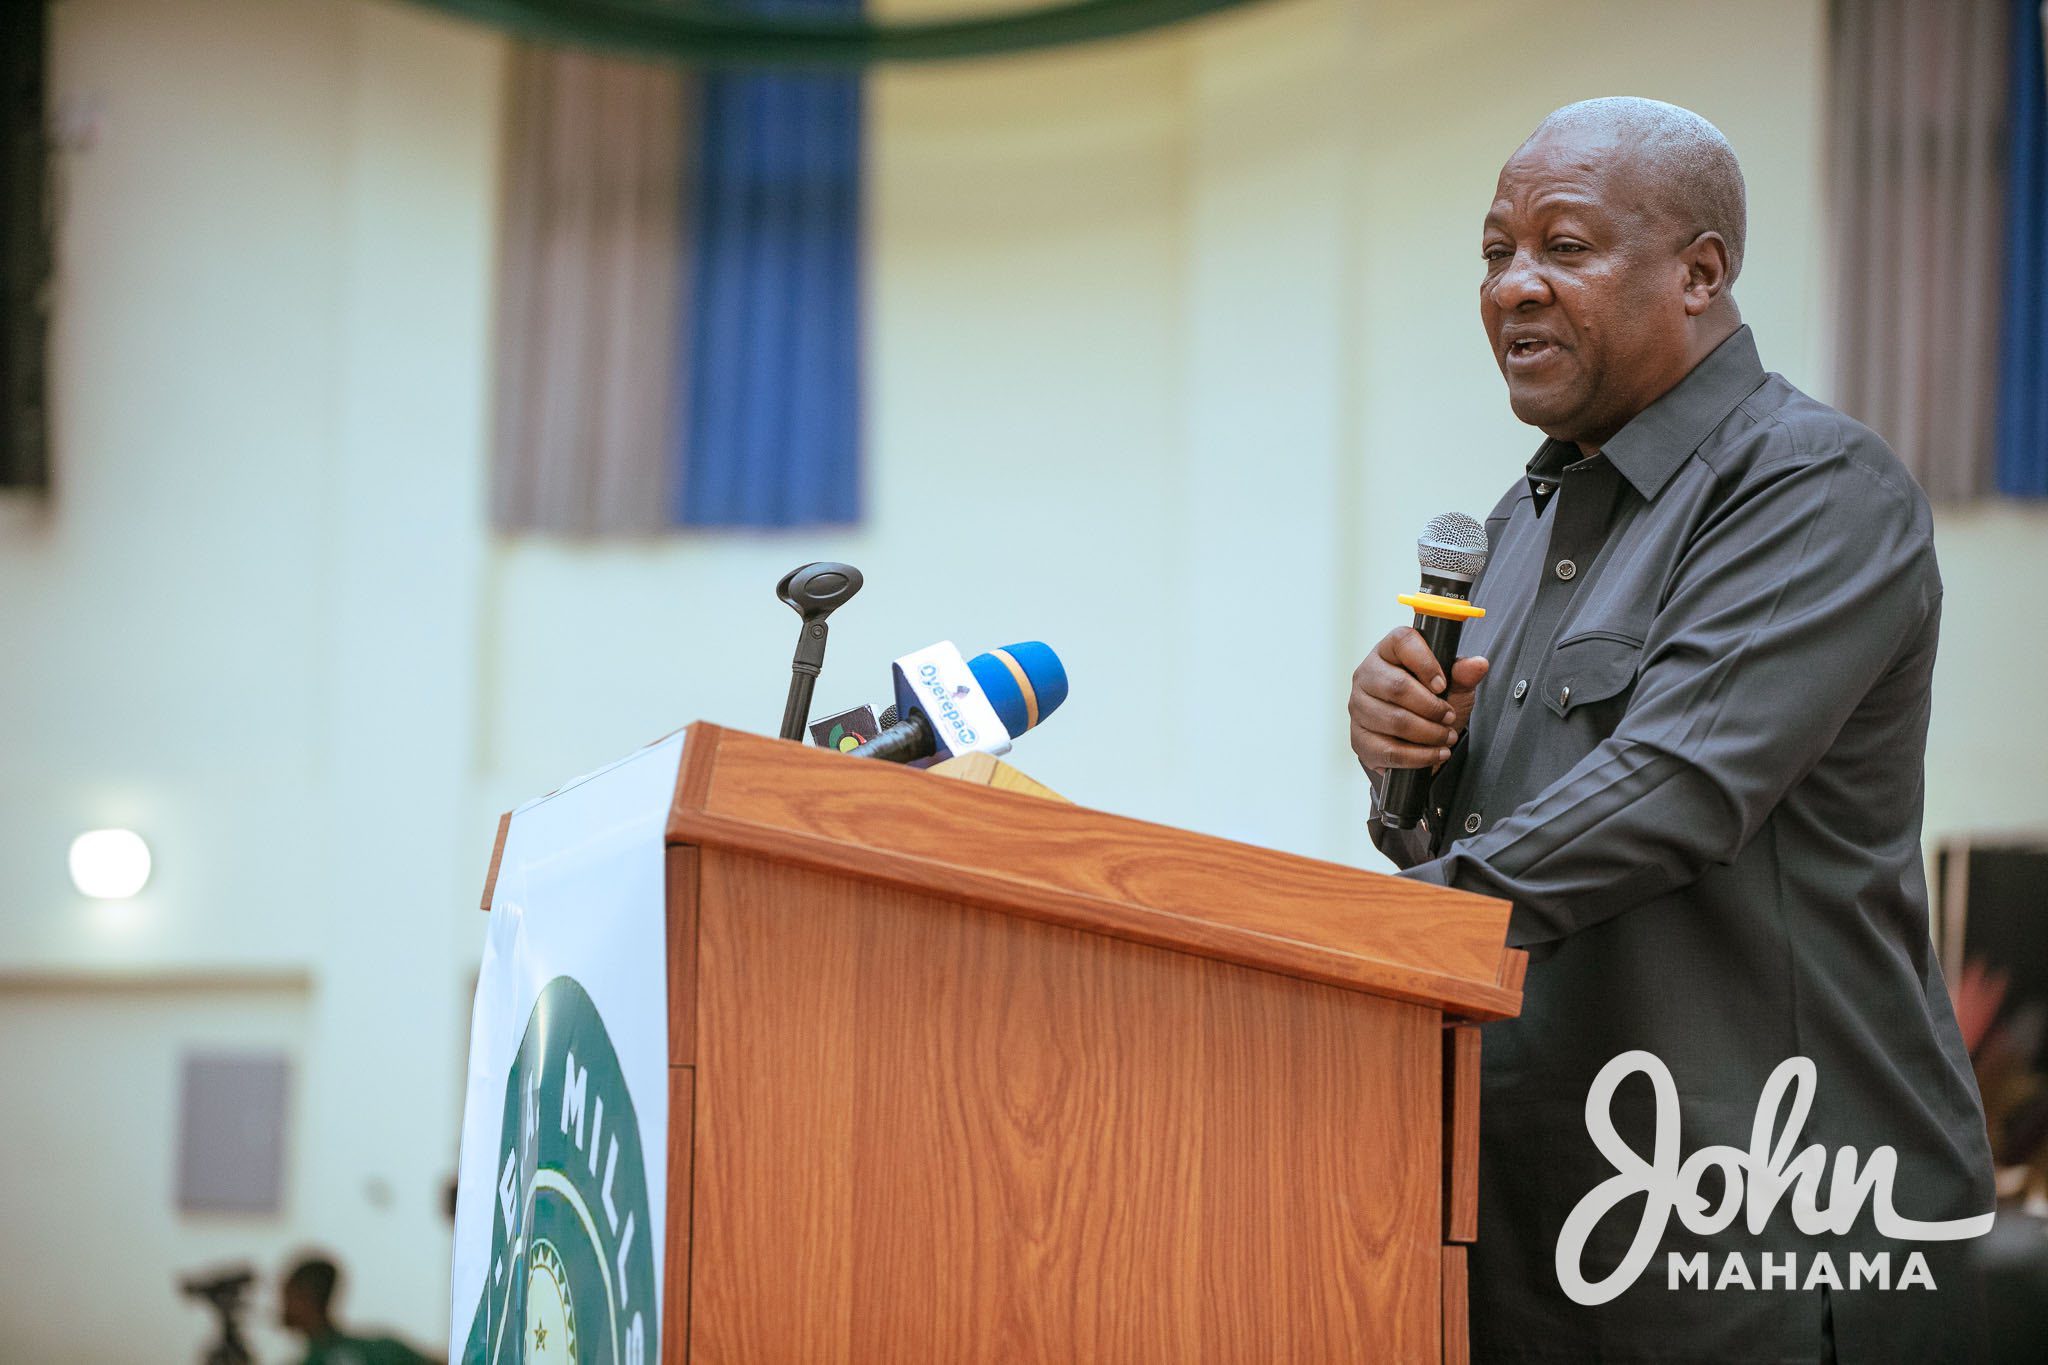 John Mahama takes a swipe at H.E Akuffo Addo over the conduct of his appointees